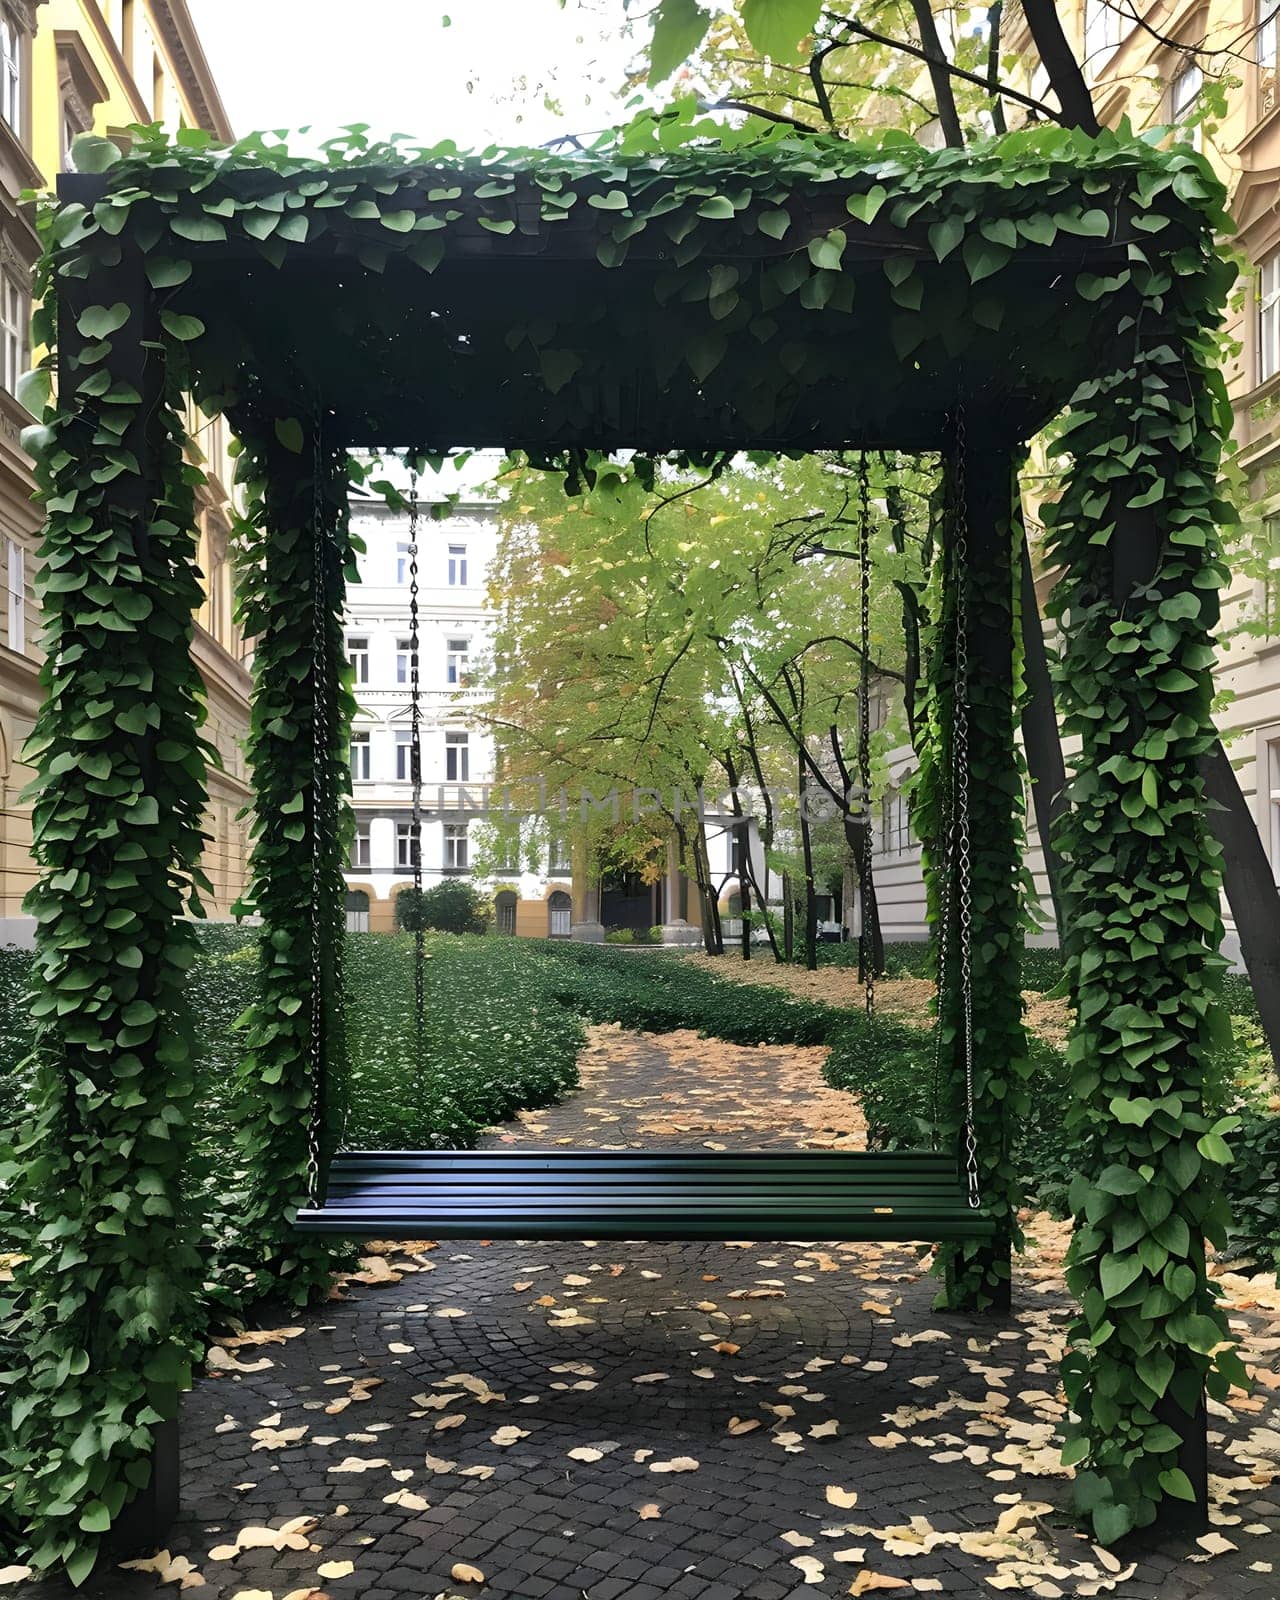 A plantfilled green bench sits under a canopy of ivy in a park, surrounded by shrubs and grass. The scene is framed by a brick archway, creating a picturesque landscape